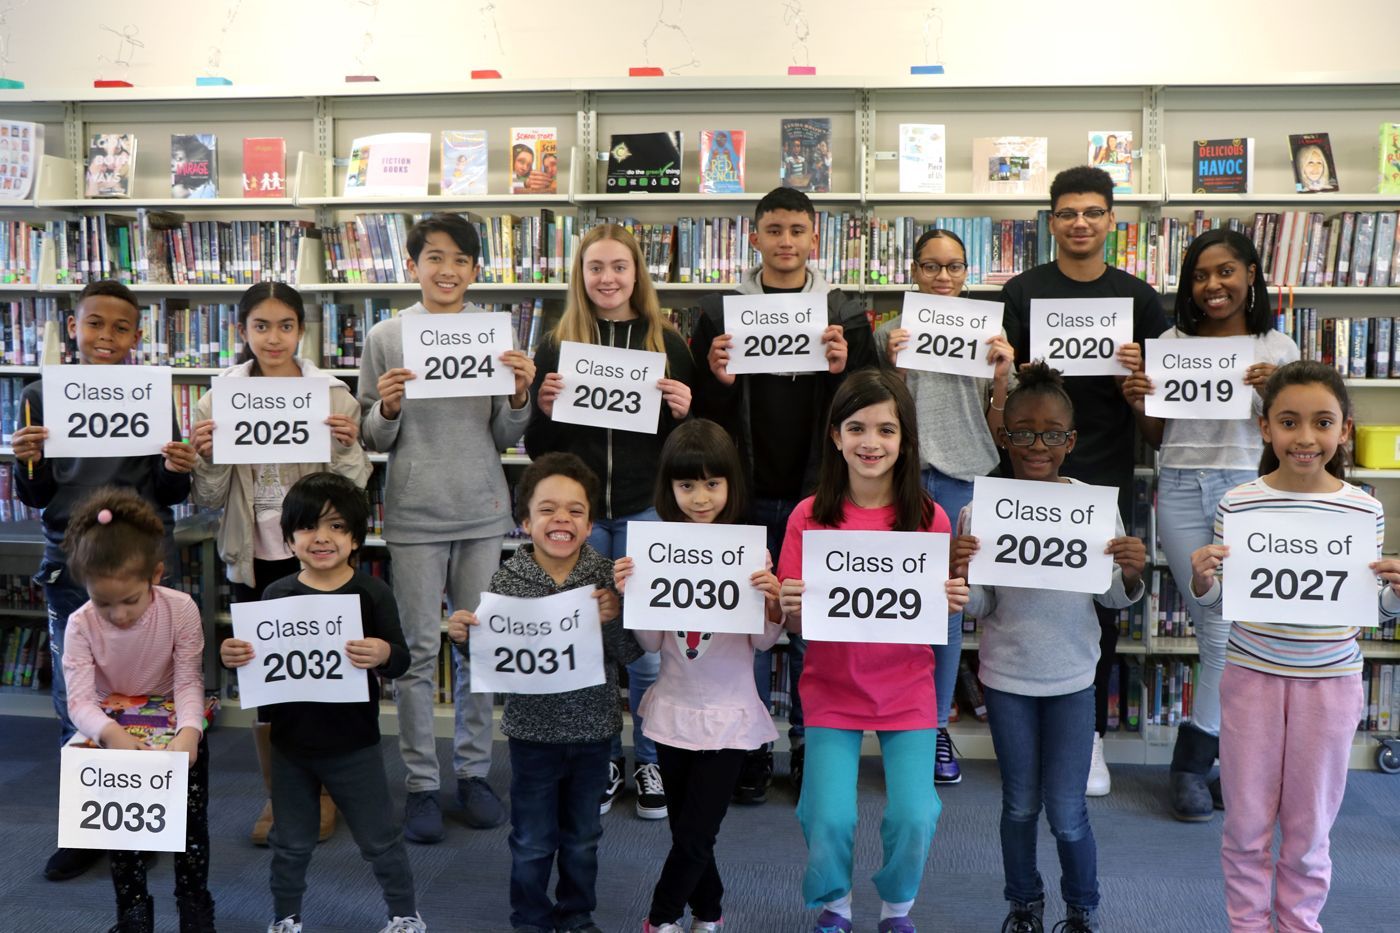 Students holding signs with their class of year on them.